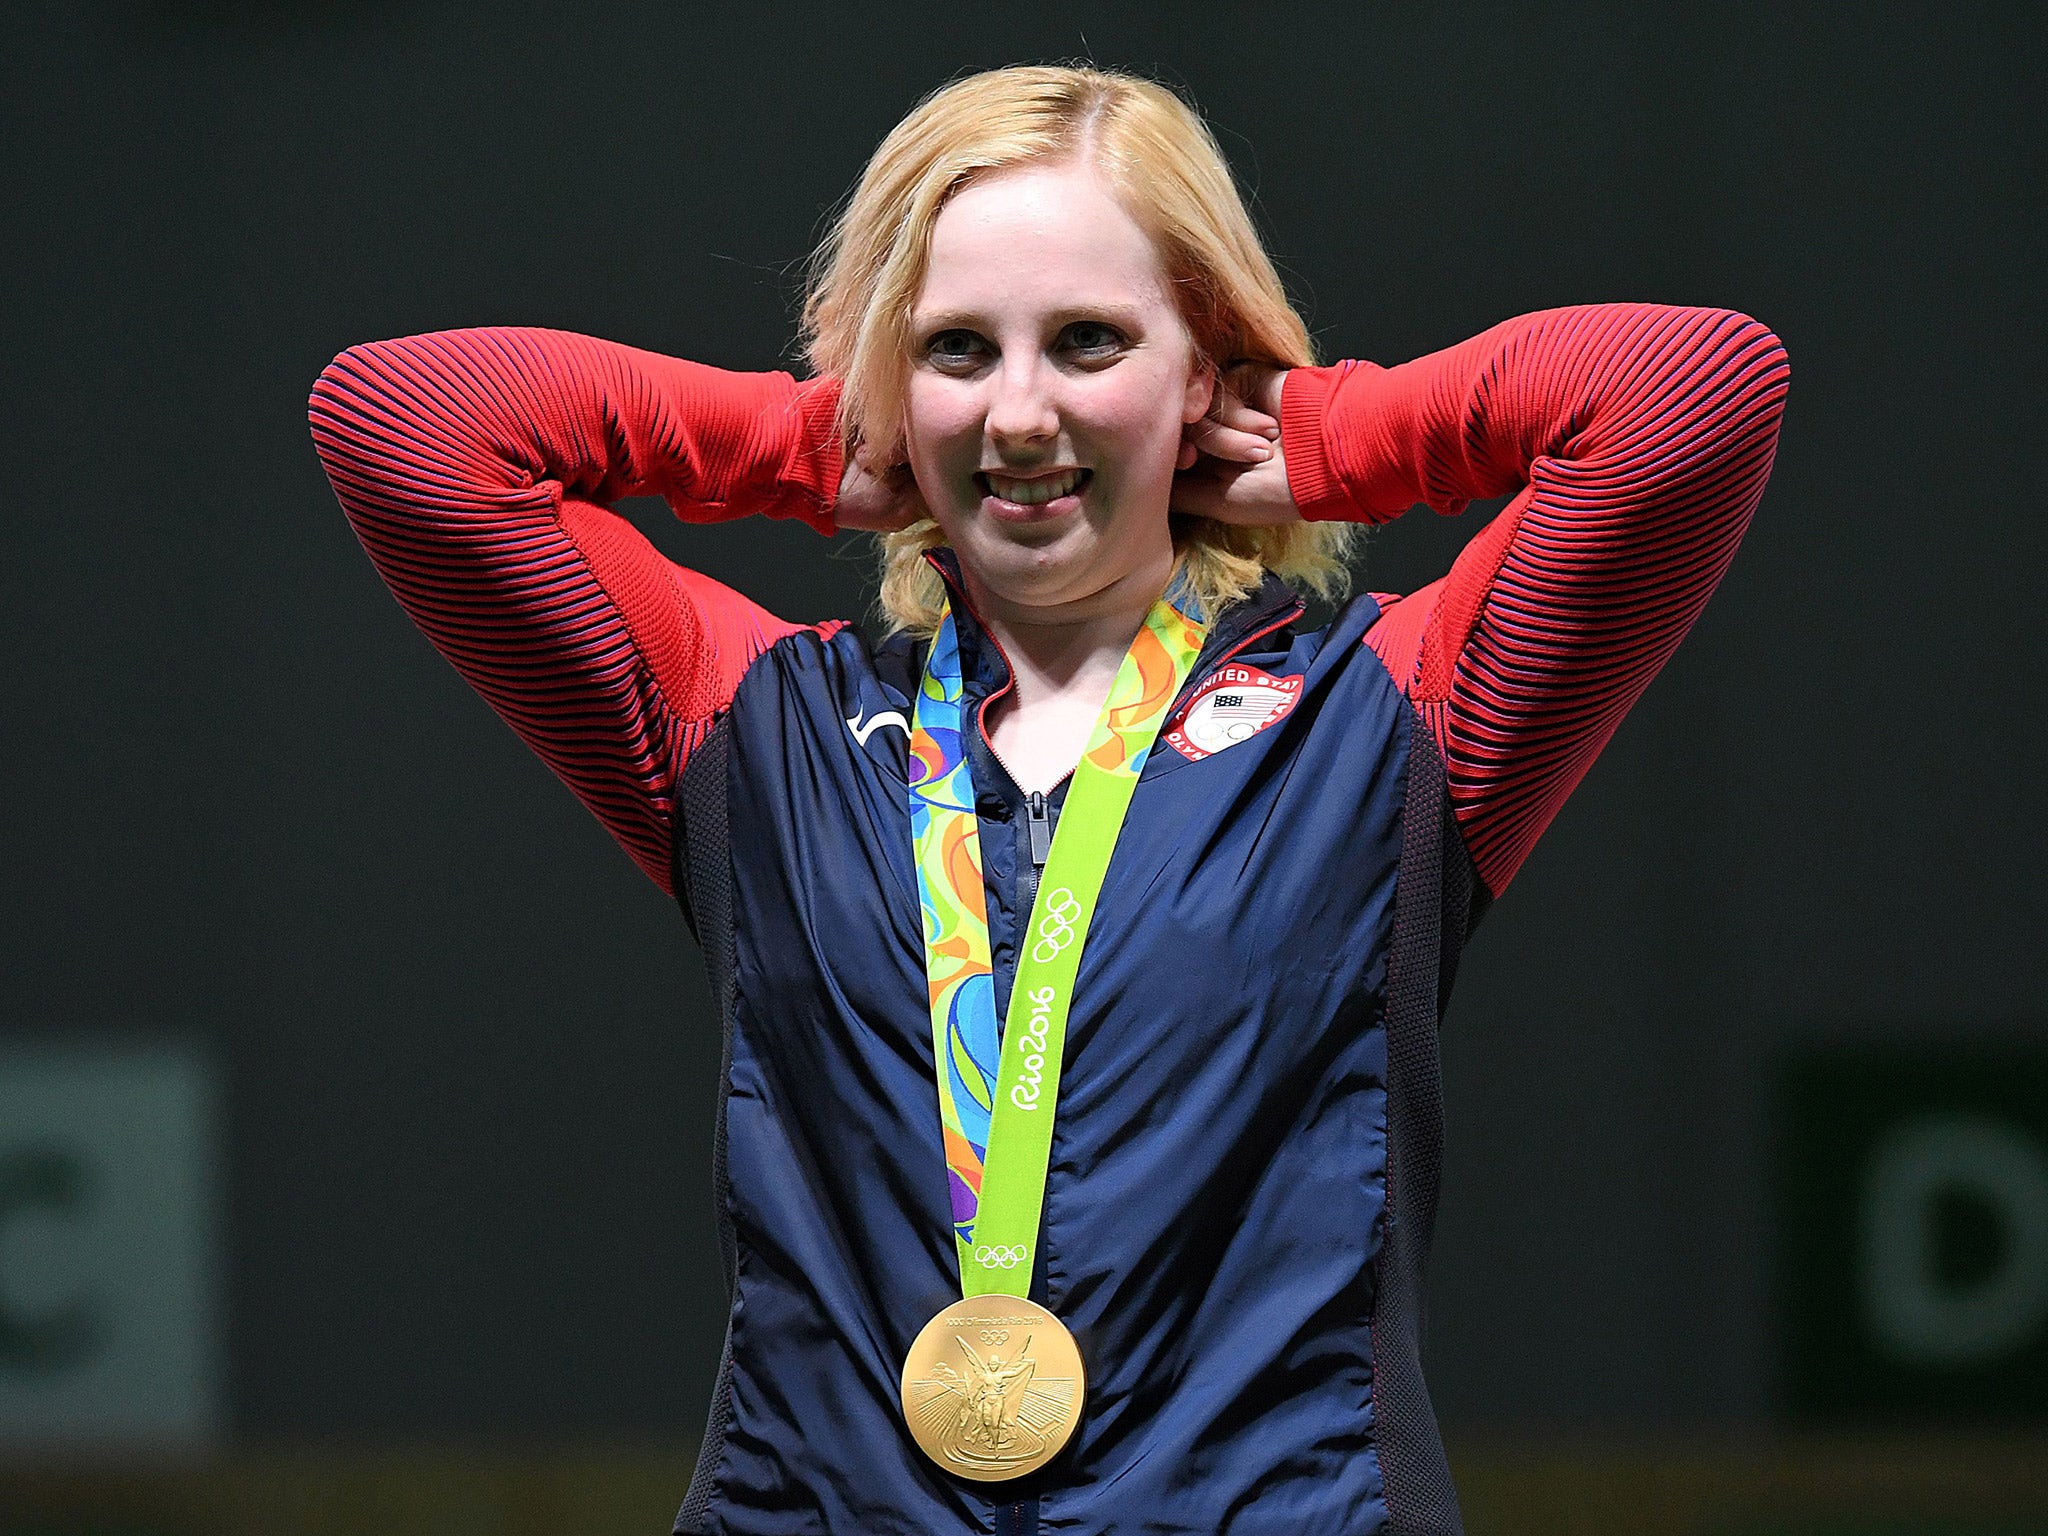 Virginia Thrasher won the first gold medal at the 2016 Olympics in the 10m air rifle shooting